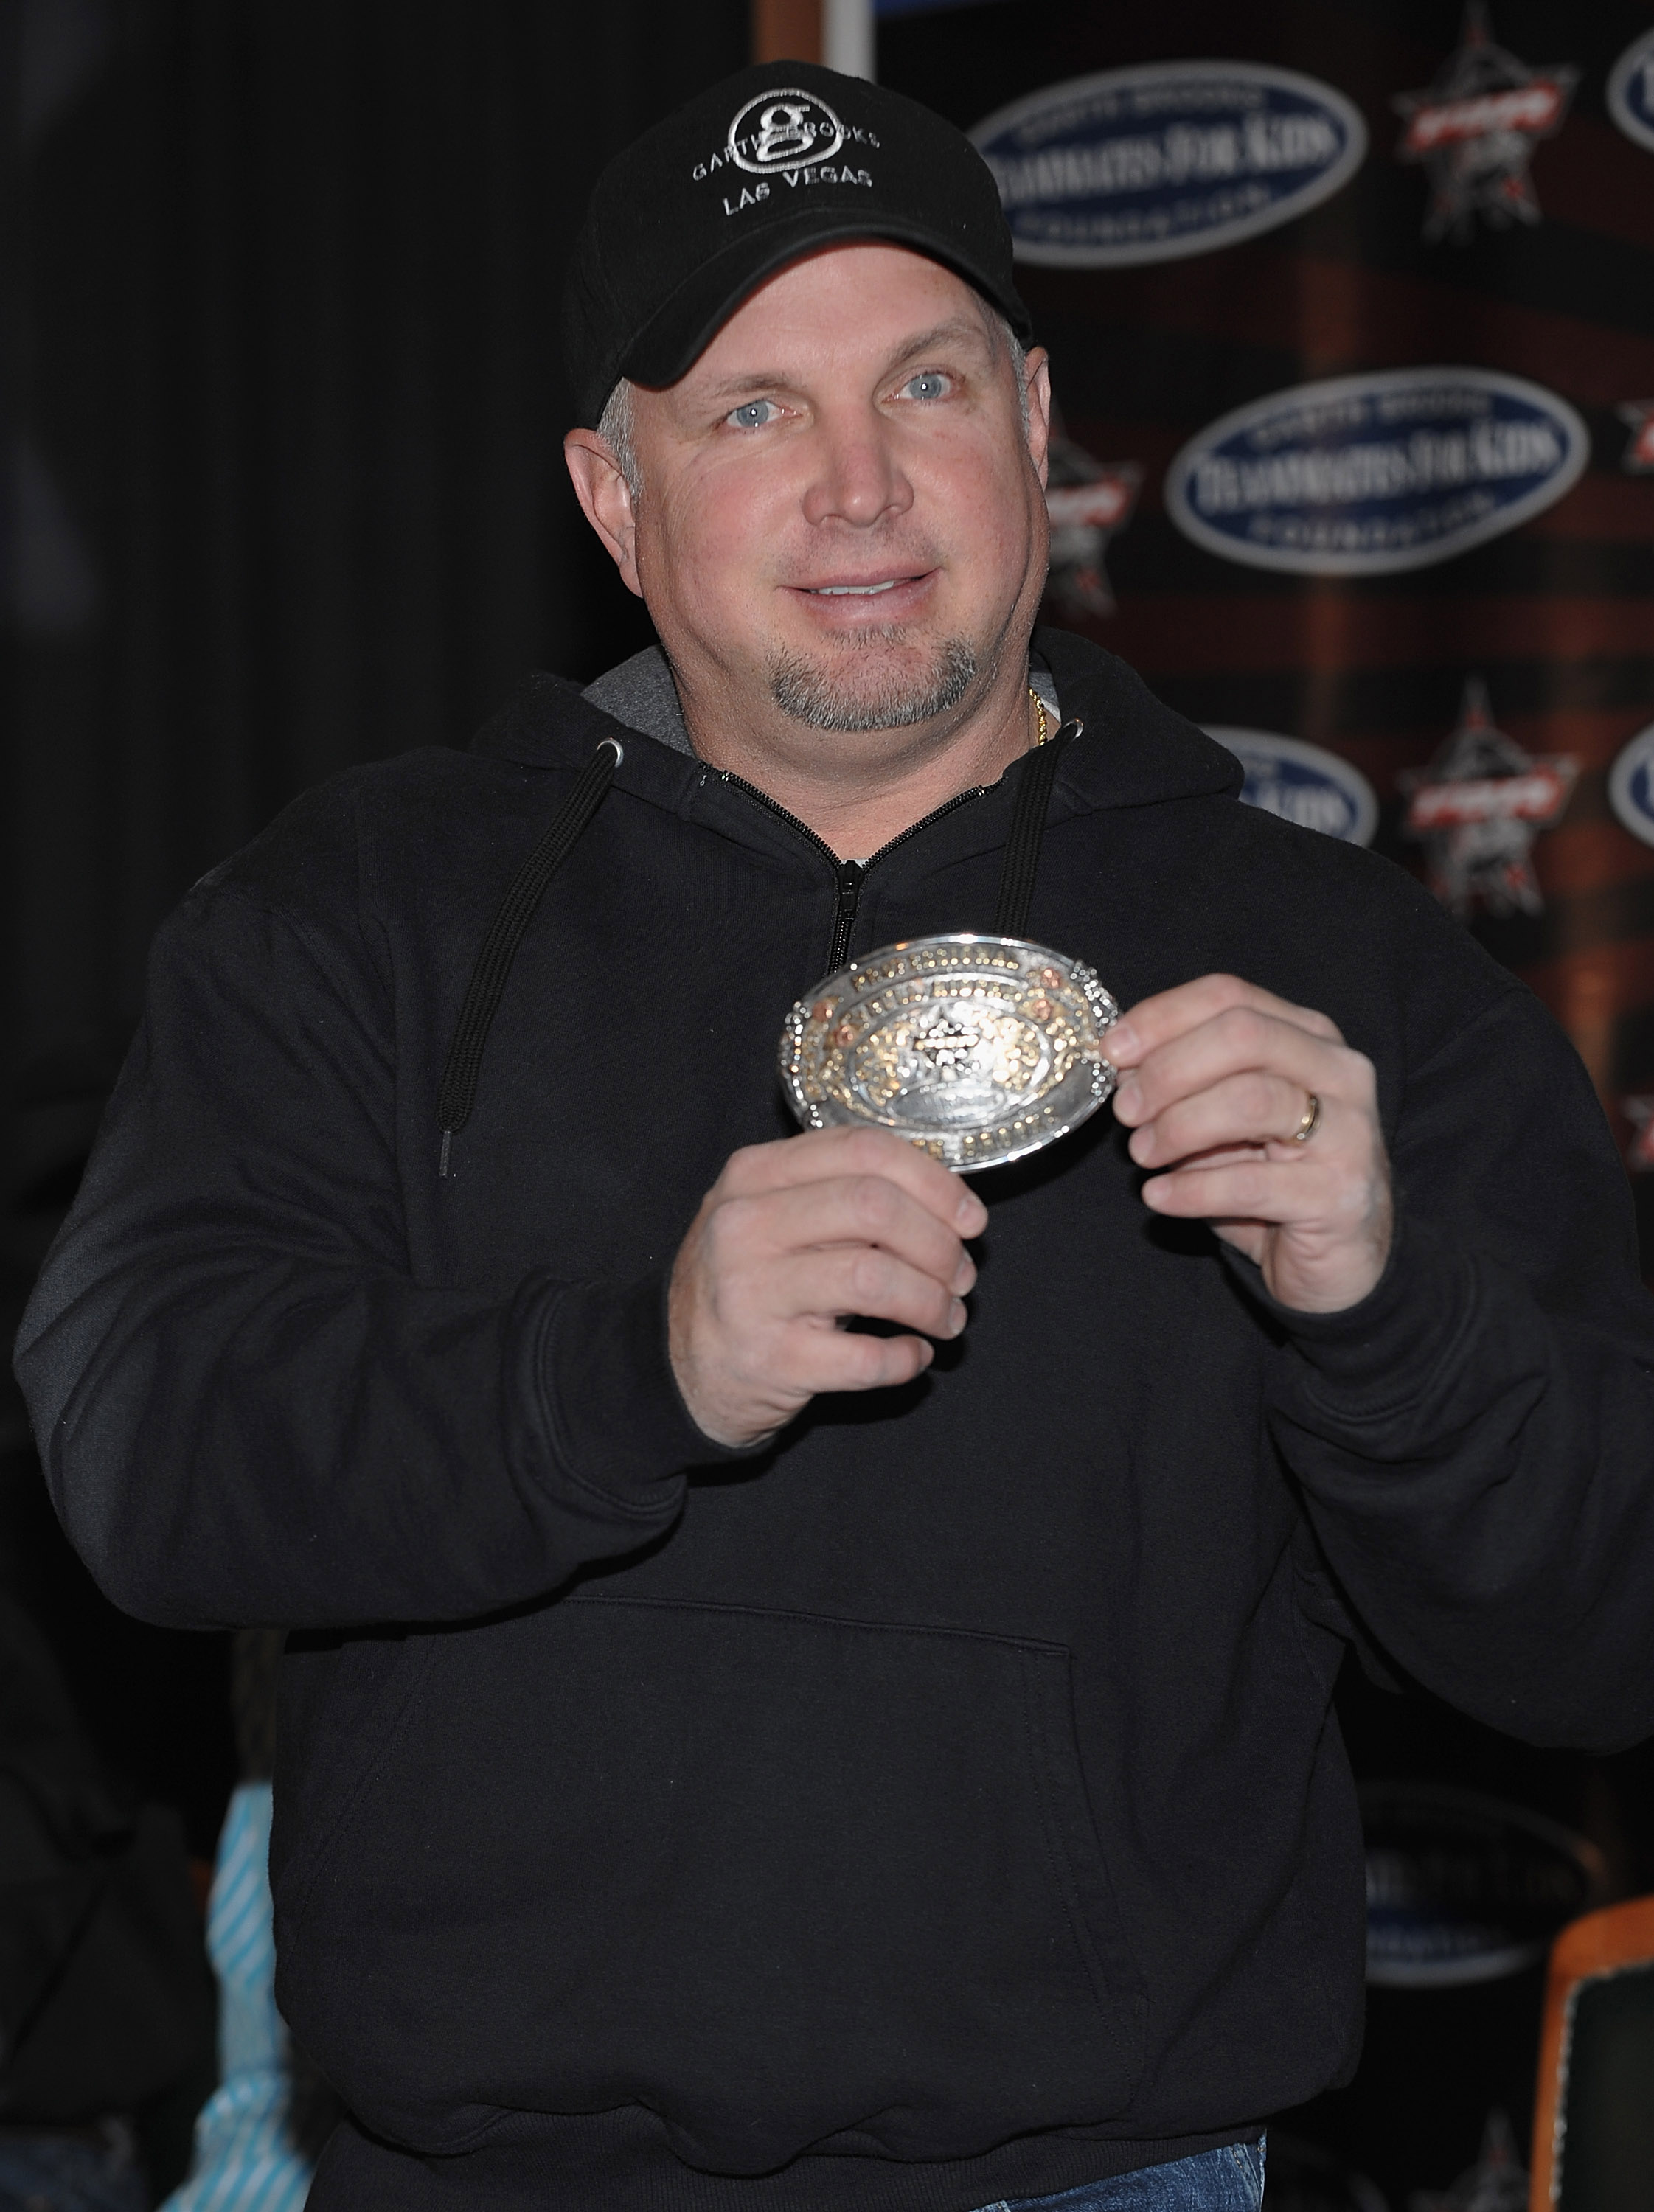 Garth Brooks attends the PBR & Garth Brooks Teammates For Kids Foundation press conference at Madison Square Garden on January 8, 2010 in New York City | Source: Getty Images